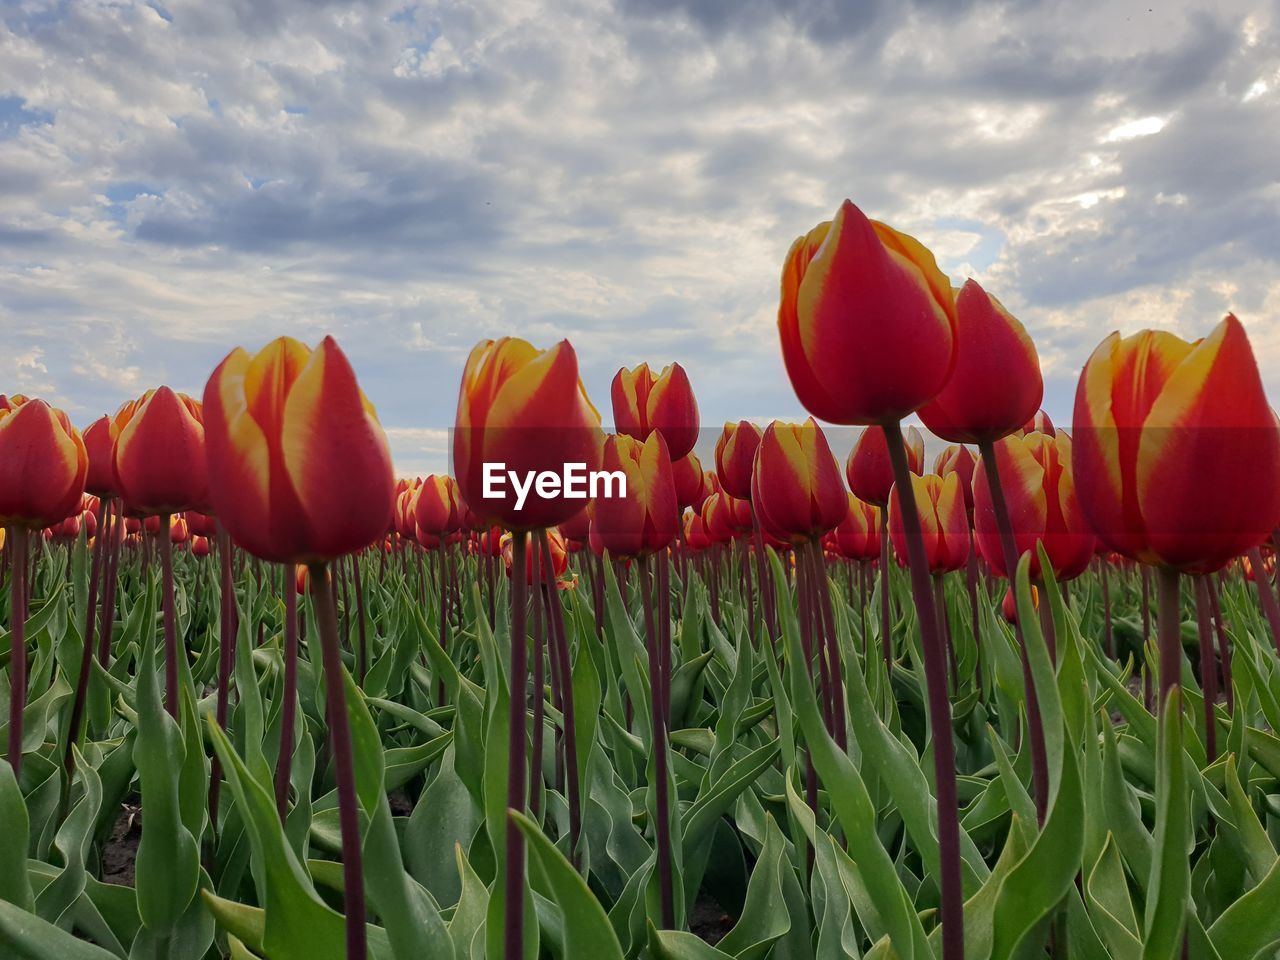 VIEW OF TULIPS ON FIELD AGAINST SKY